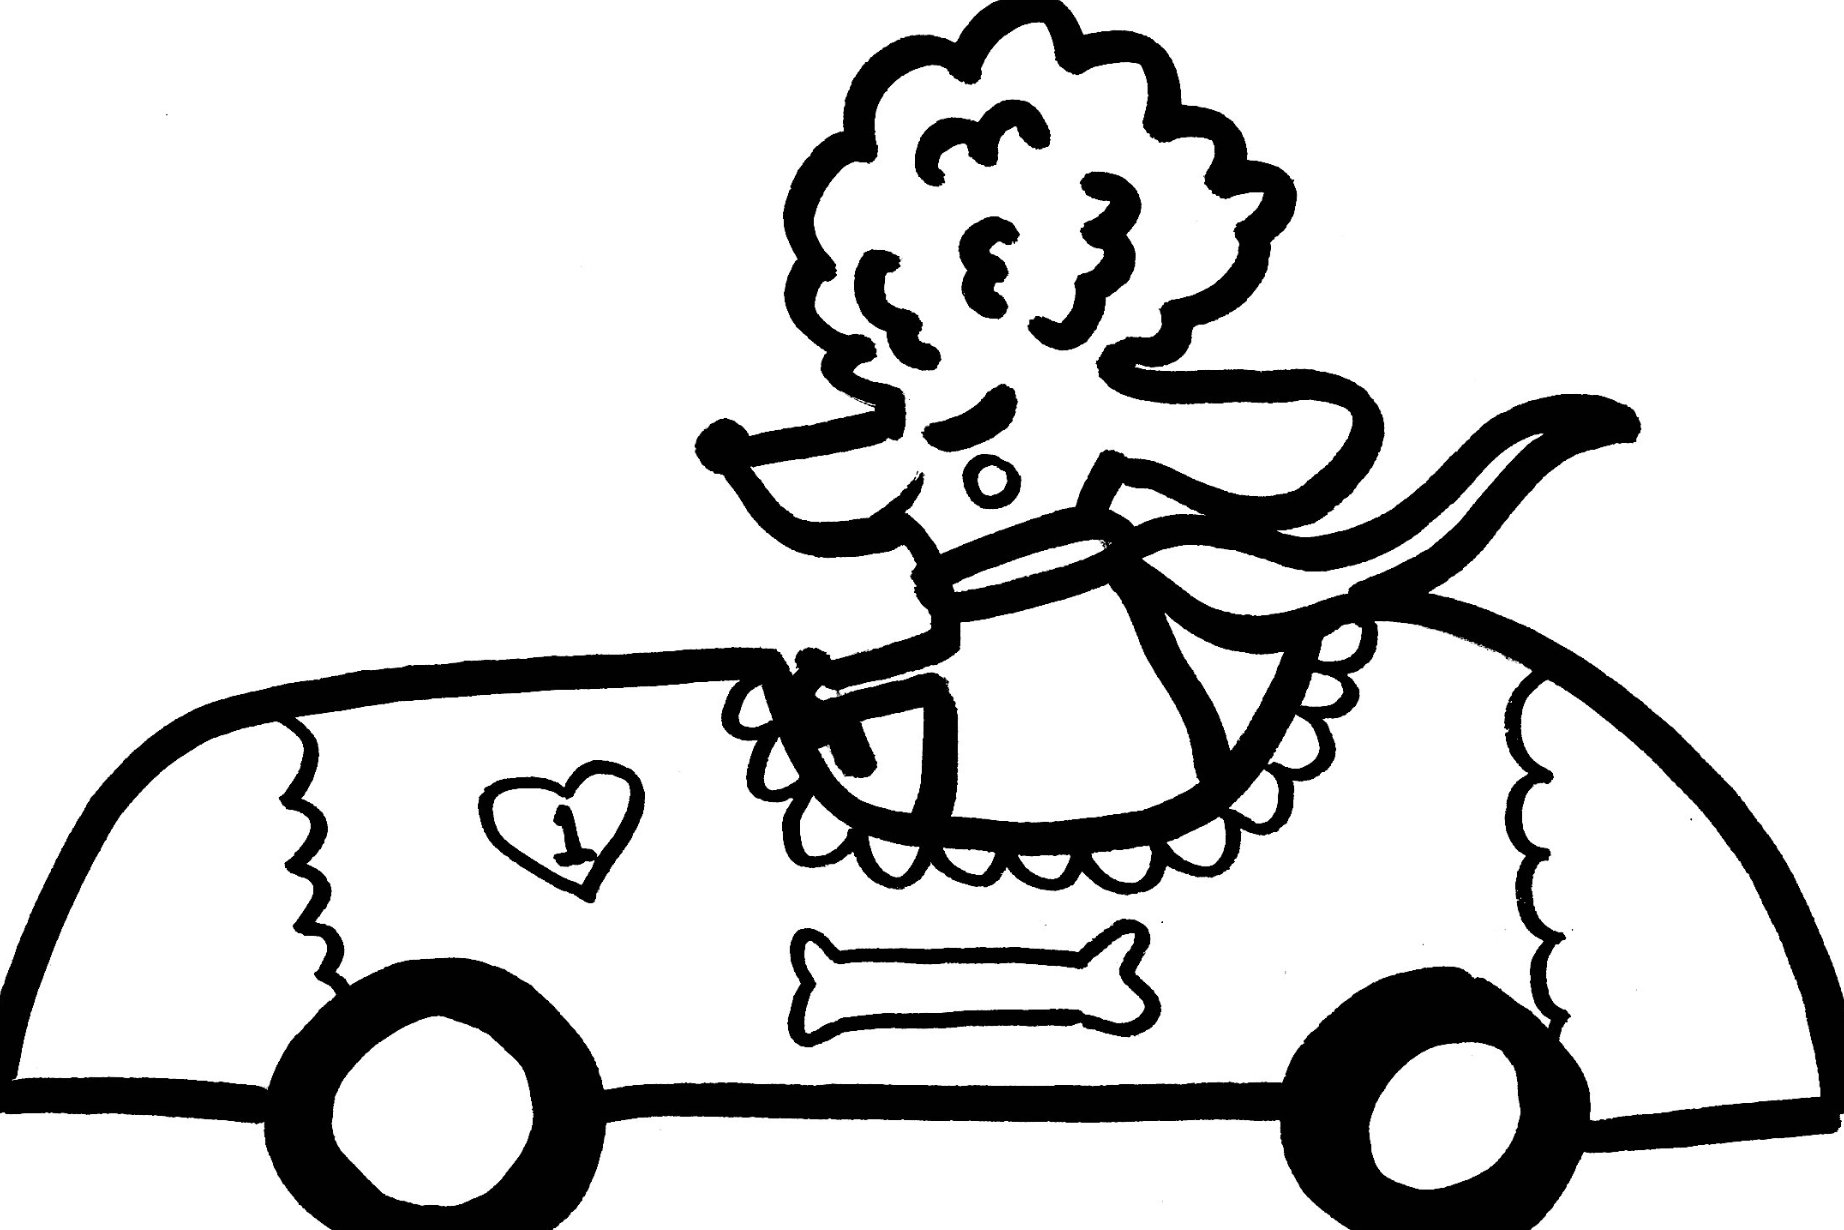 Poodle in Car.png